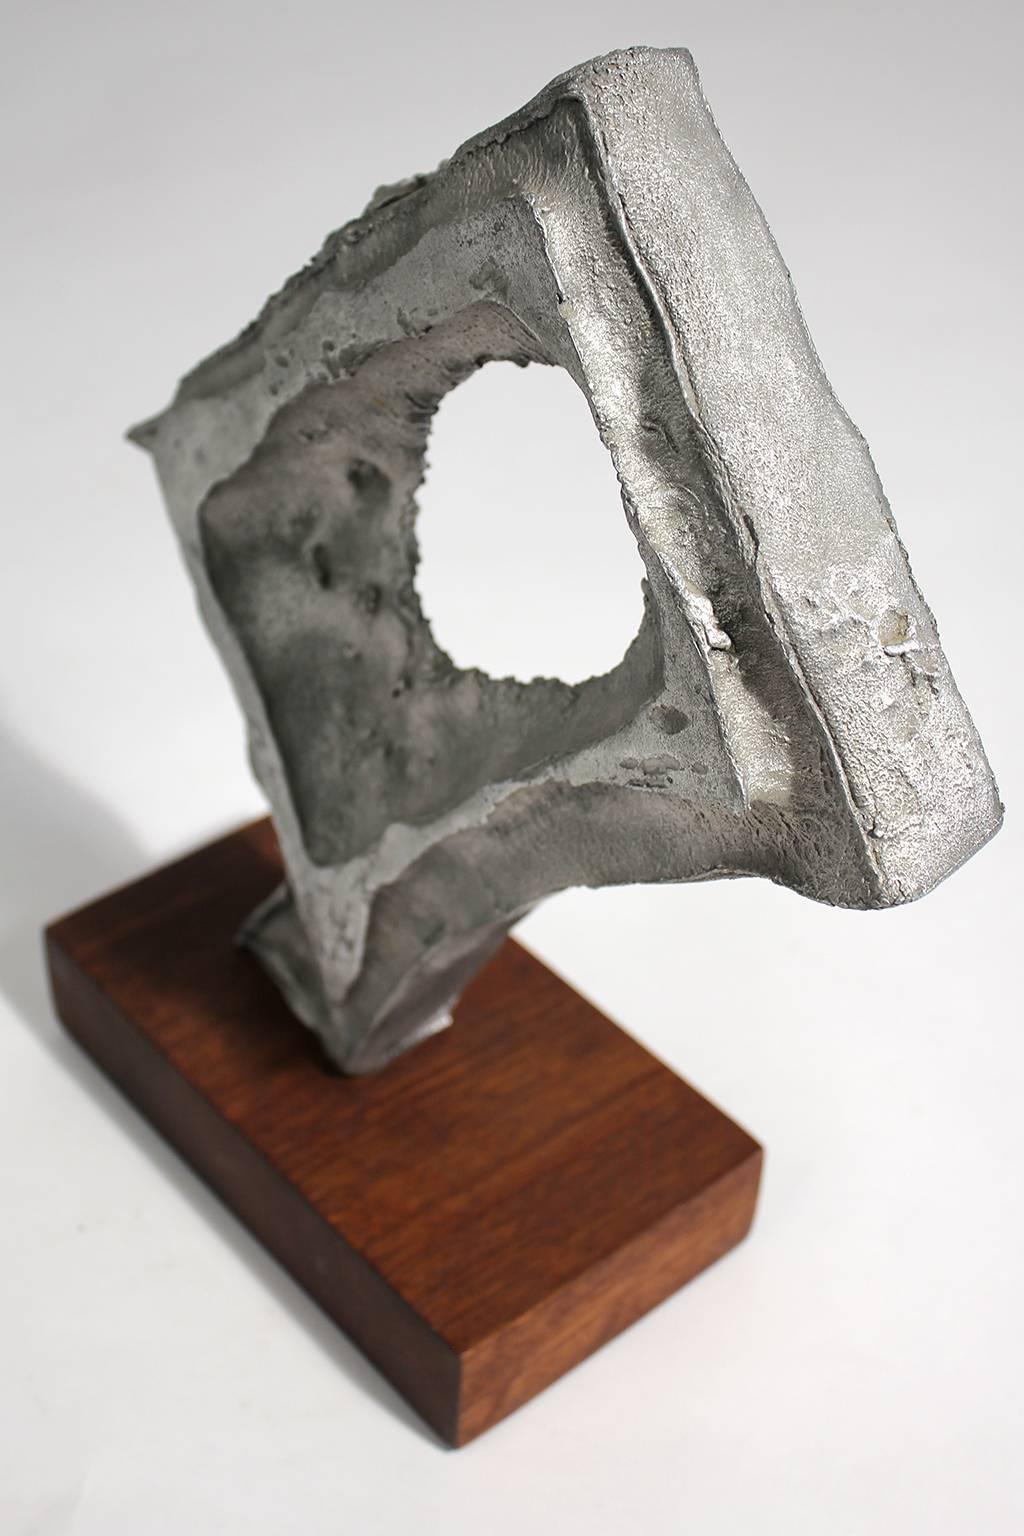 20th Century Abstract Modernist Aluminium and Walnut Free-Form Sculpture